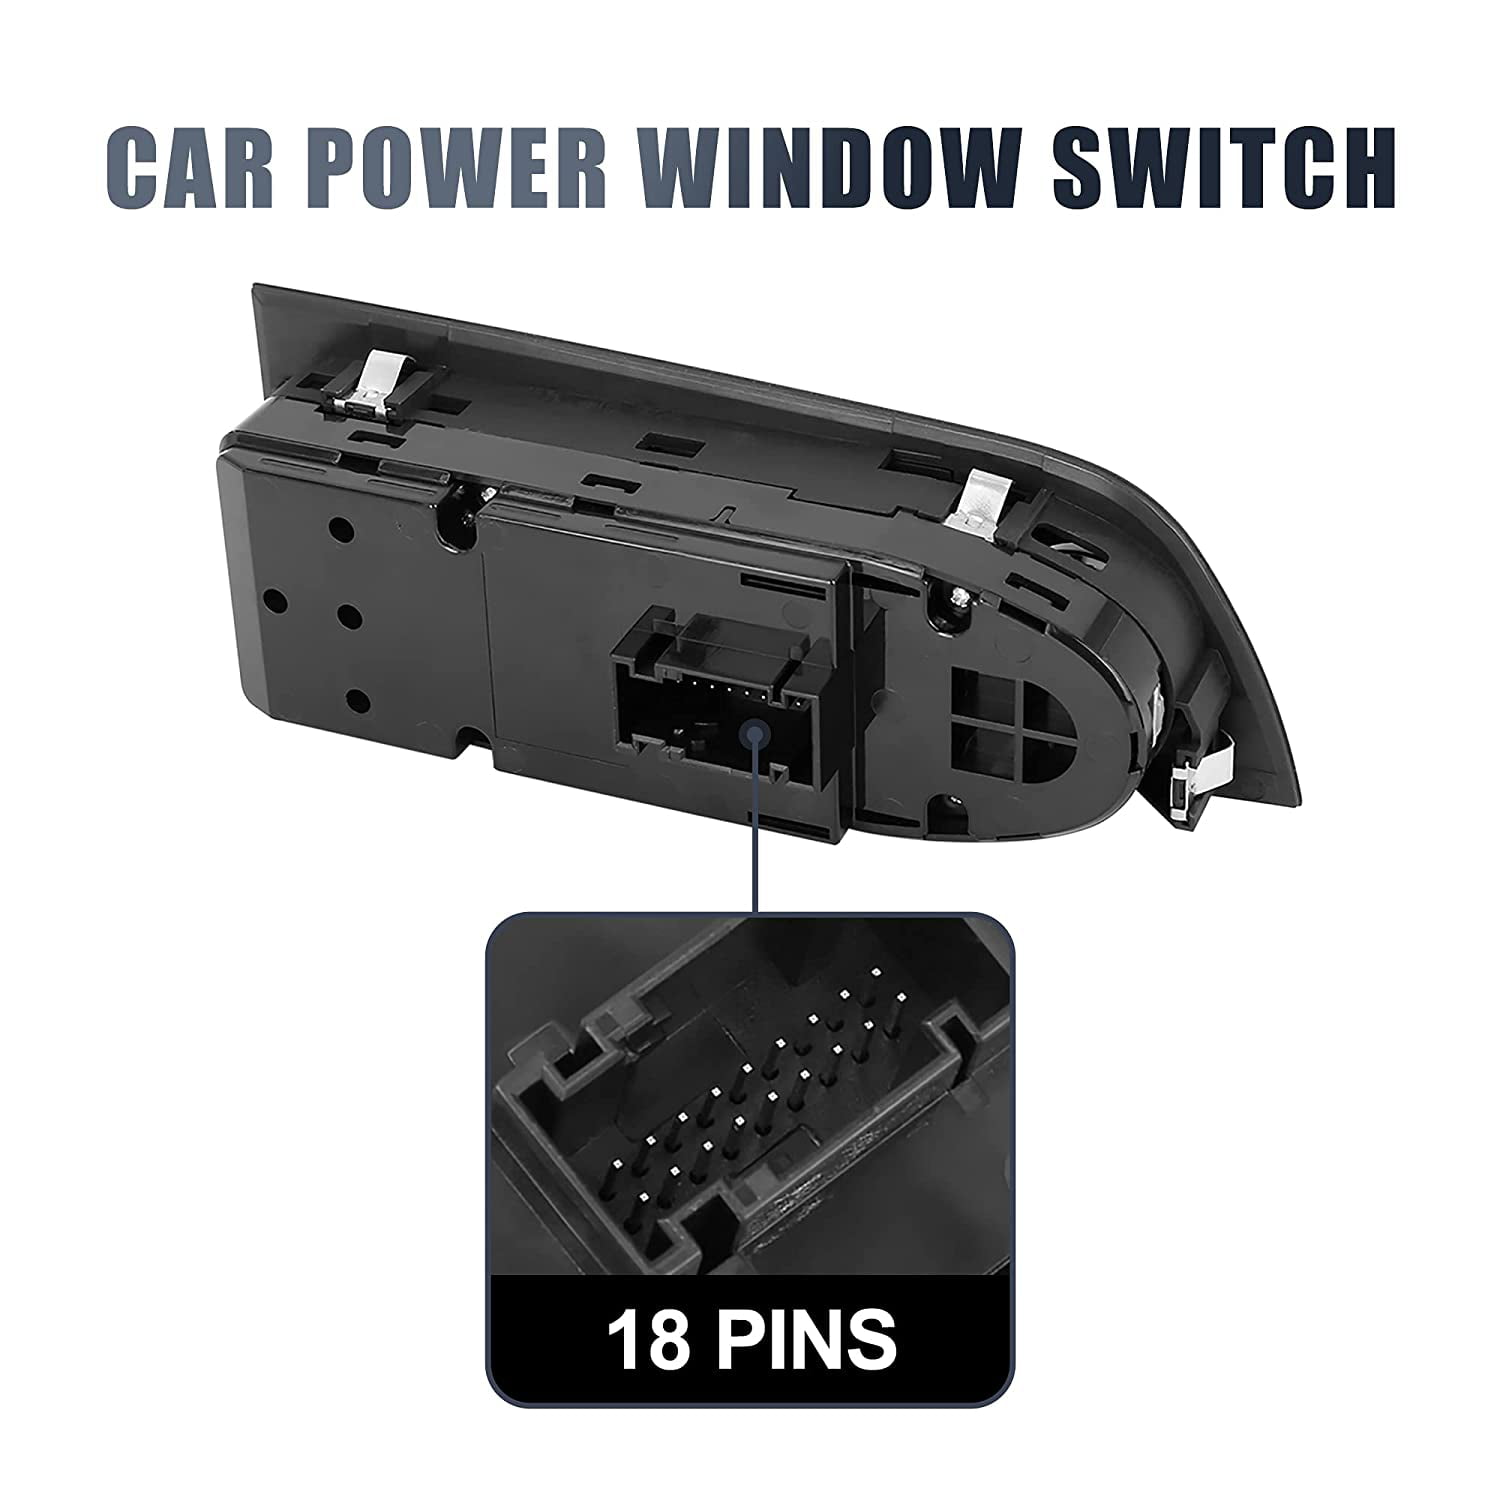 Heart Horse Window Switch Master Control Replacement for E90 E91 325i 328i 330i Part Number 61319217329